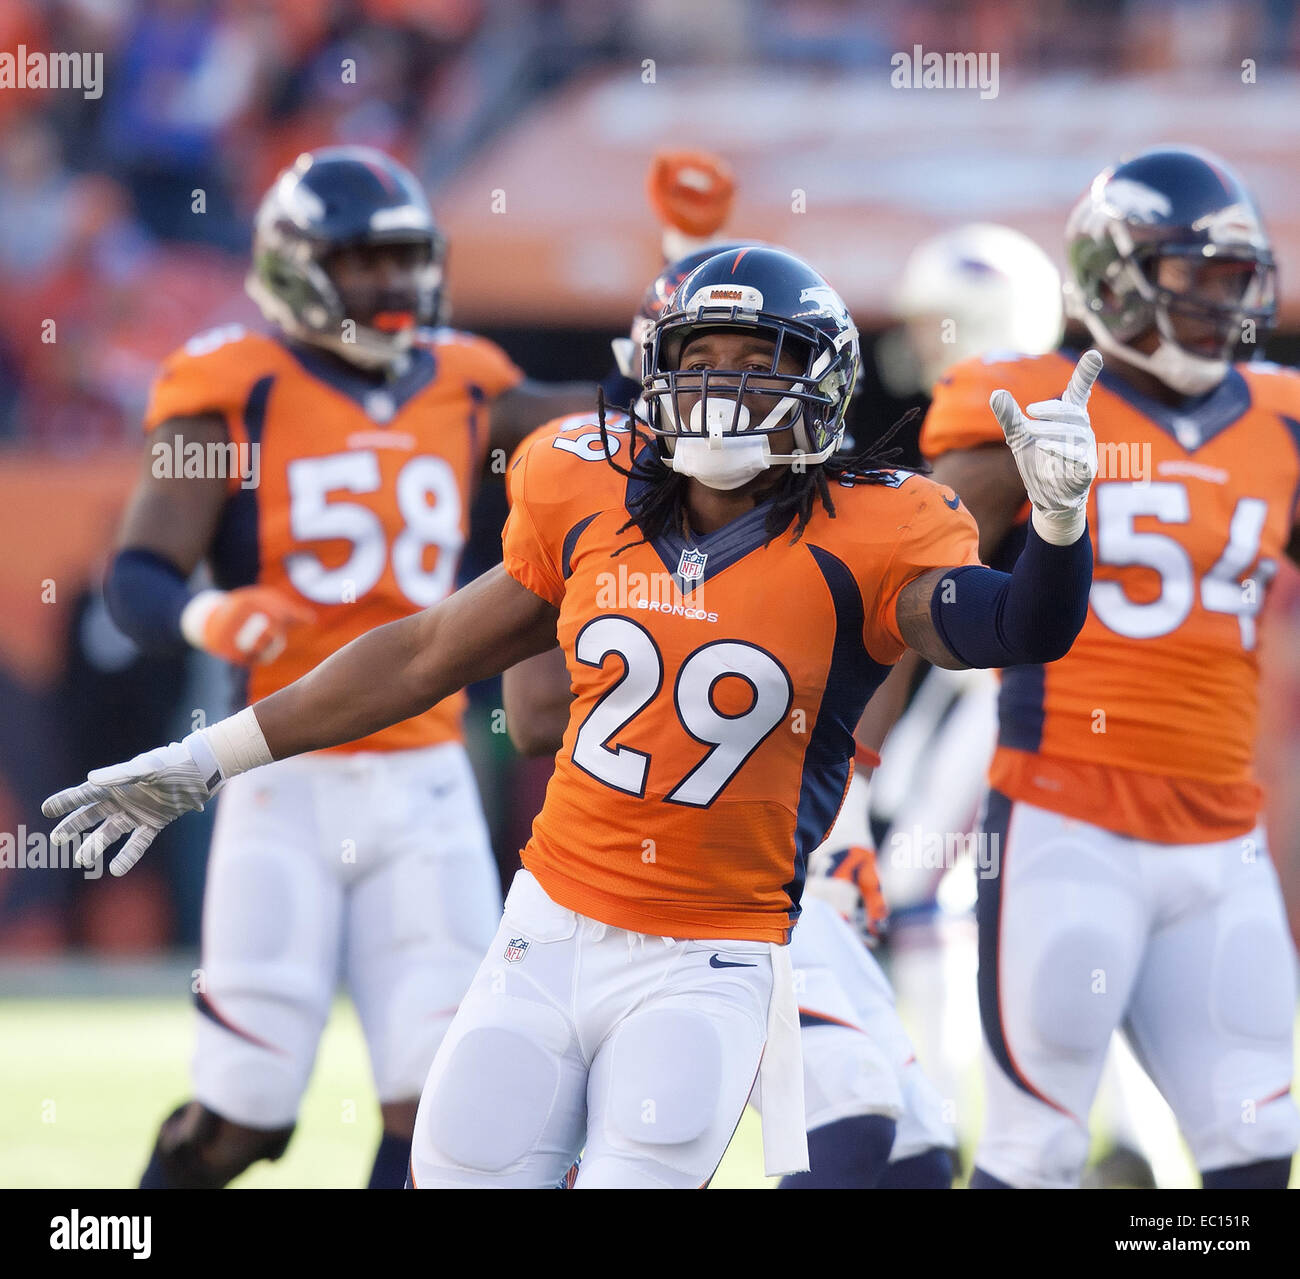 Denver, Colorado, USA. 7th Dec, 2014. Broncos CB BRADLEY ROBY celebrates with team mates after knocking down a pass during the 1st. Half at Sports Authority Field at Mile High Sunday afternoon. The Broncos beat the Bills 24-17. Credit:  Hector Acevedo/ZUMA Wire/Alamy Live News Stock Photo